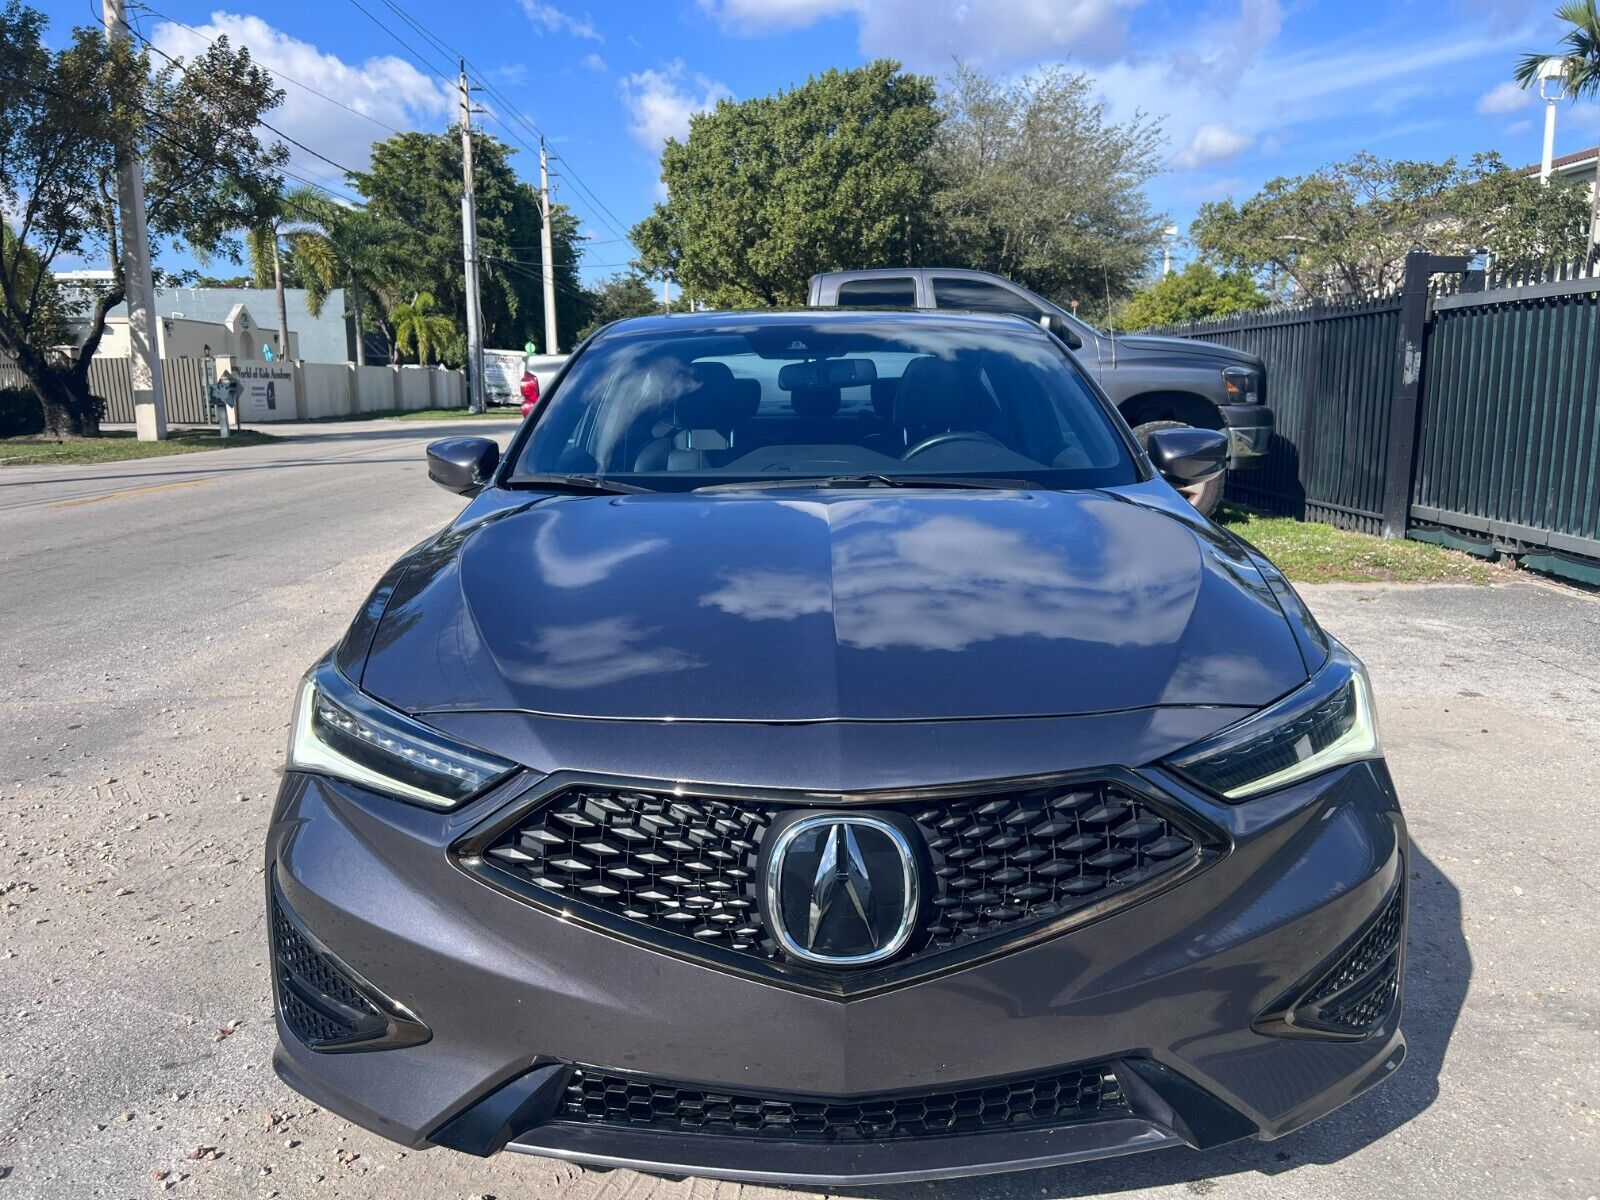 Owner 2022 ACURA ILX PREMIUM A SPEC 18K MILES MILES GAS SAVER RUNS GREAT BEST OFFER